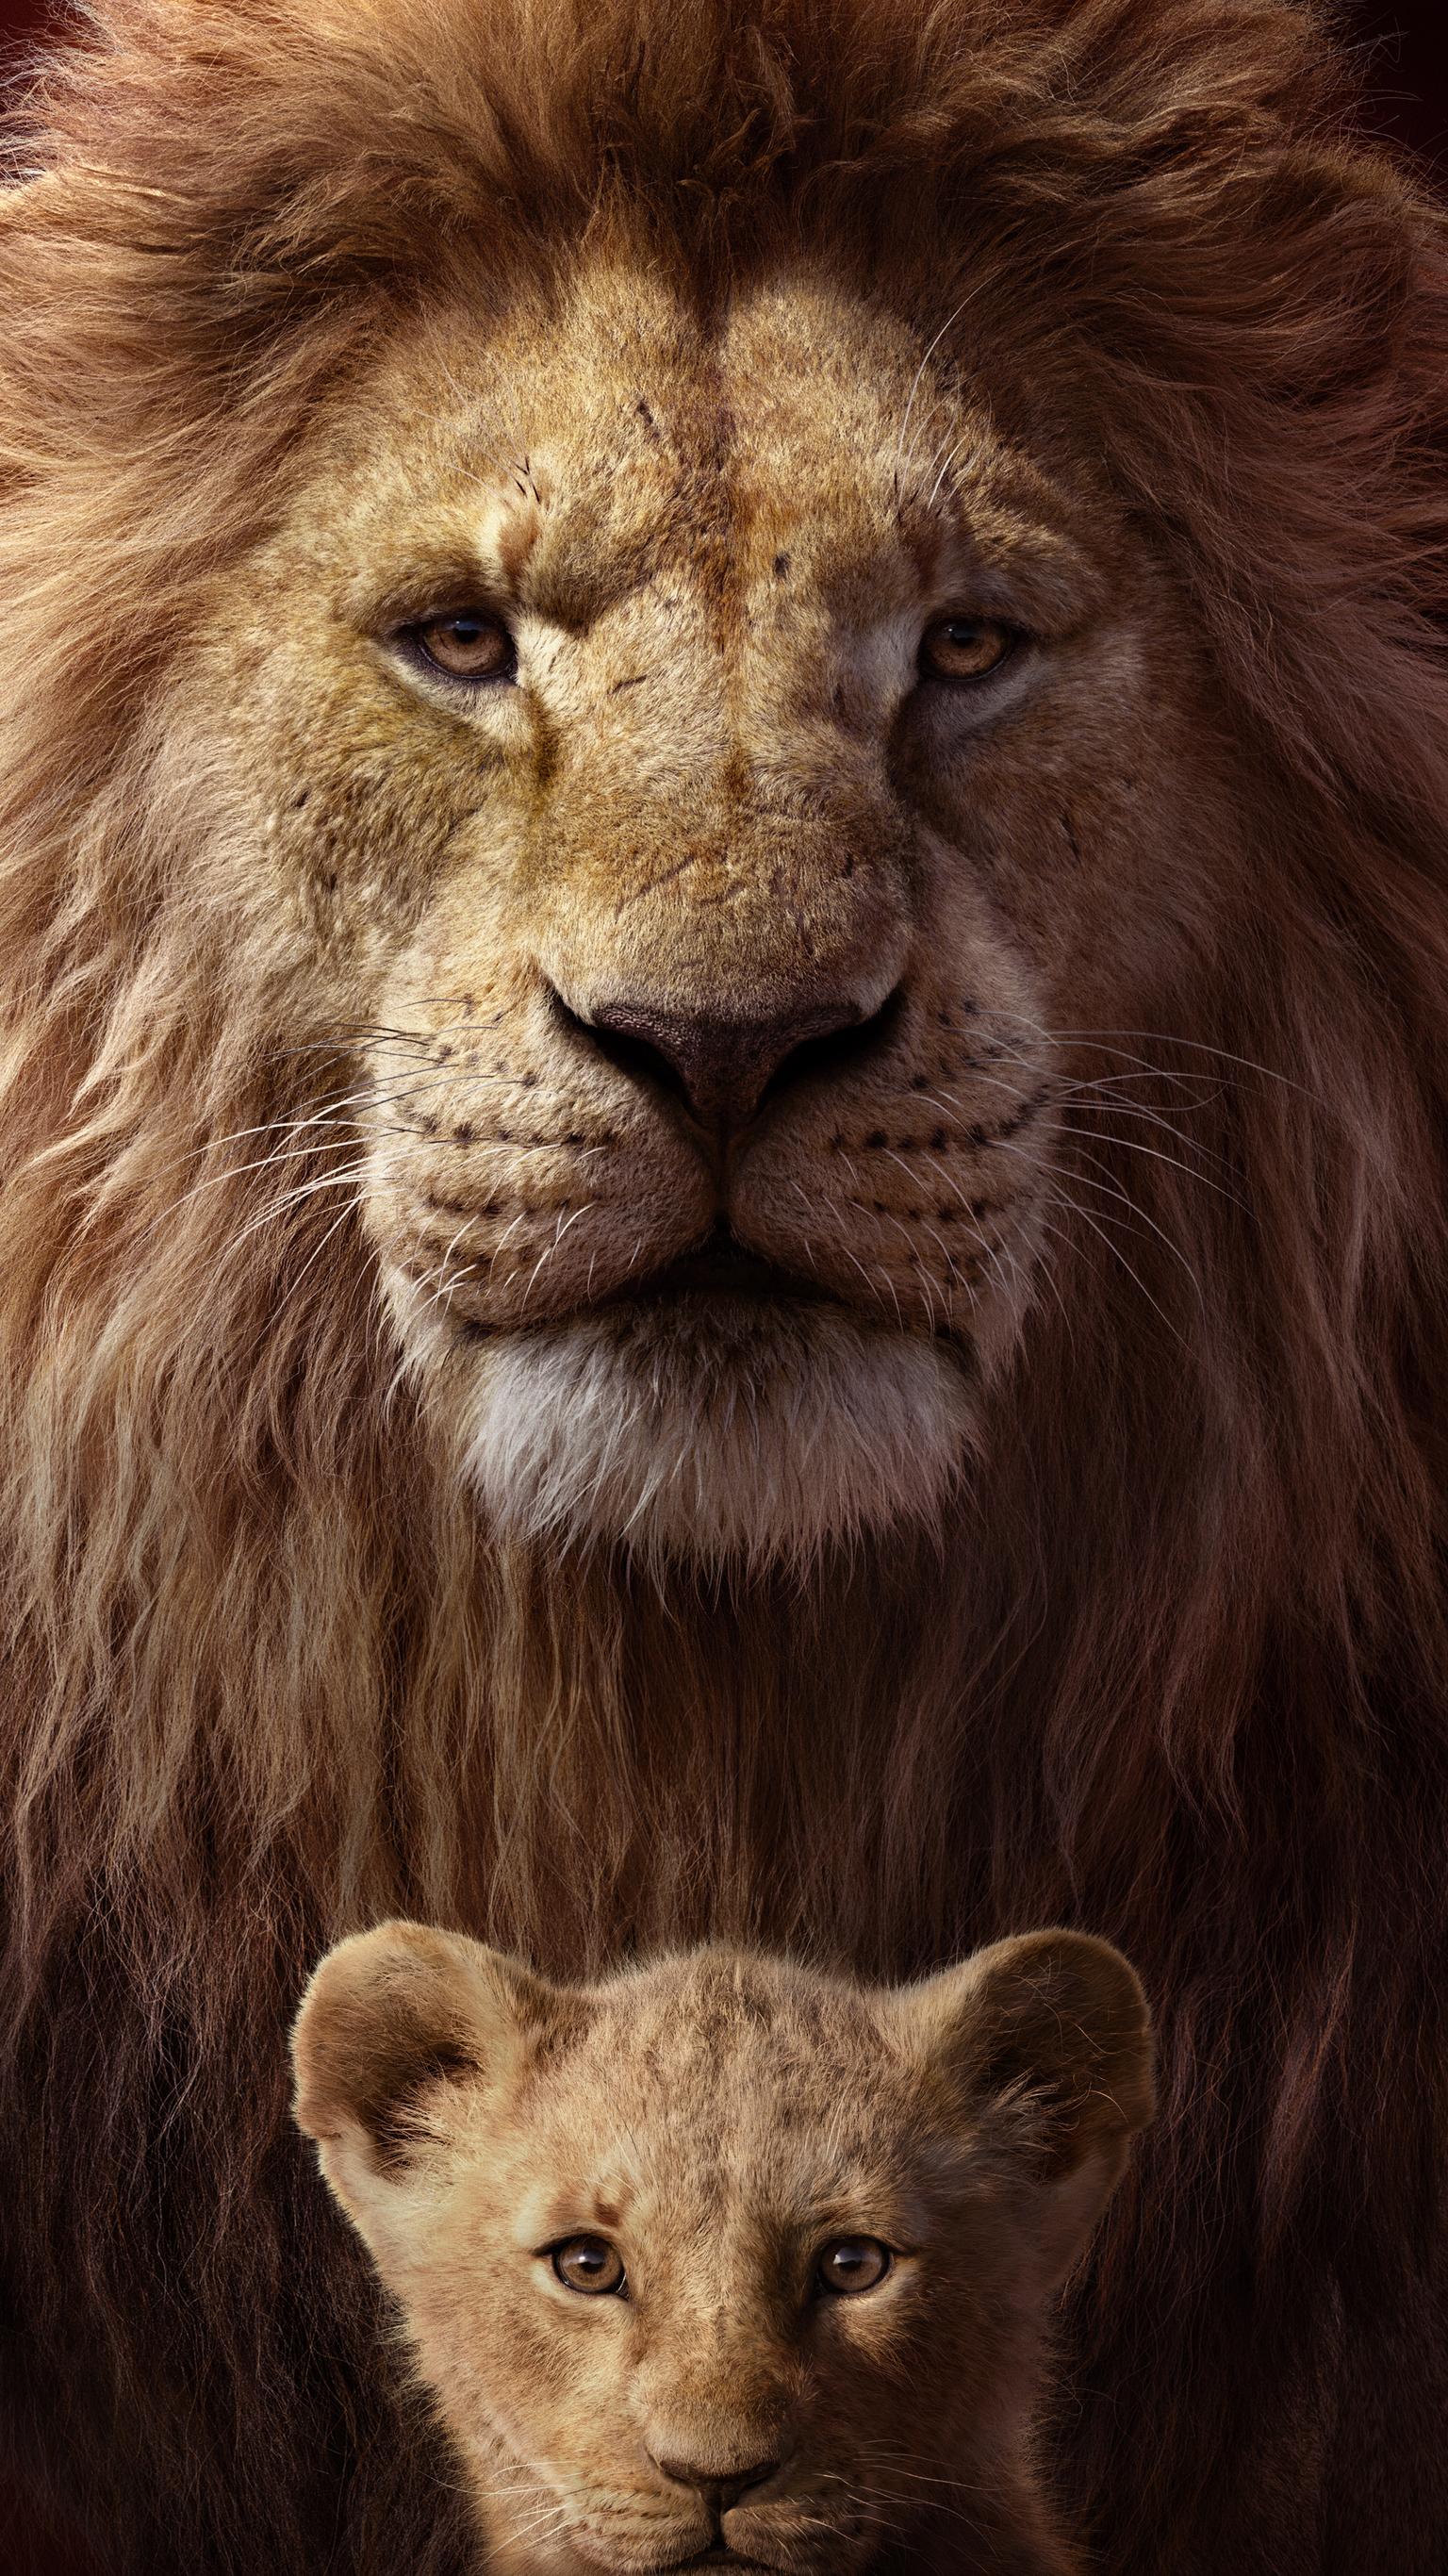 The Lion King (2019) Phone Wallpaper